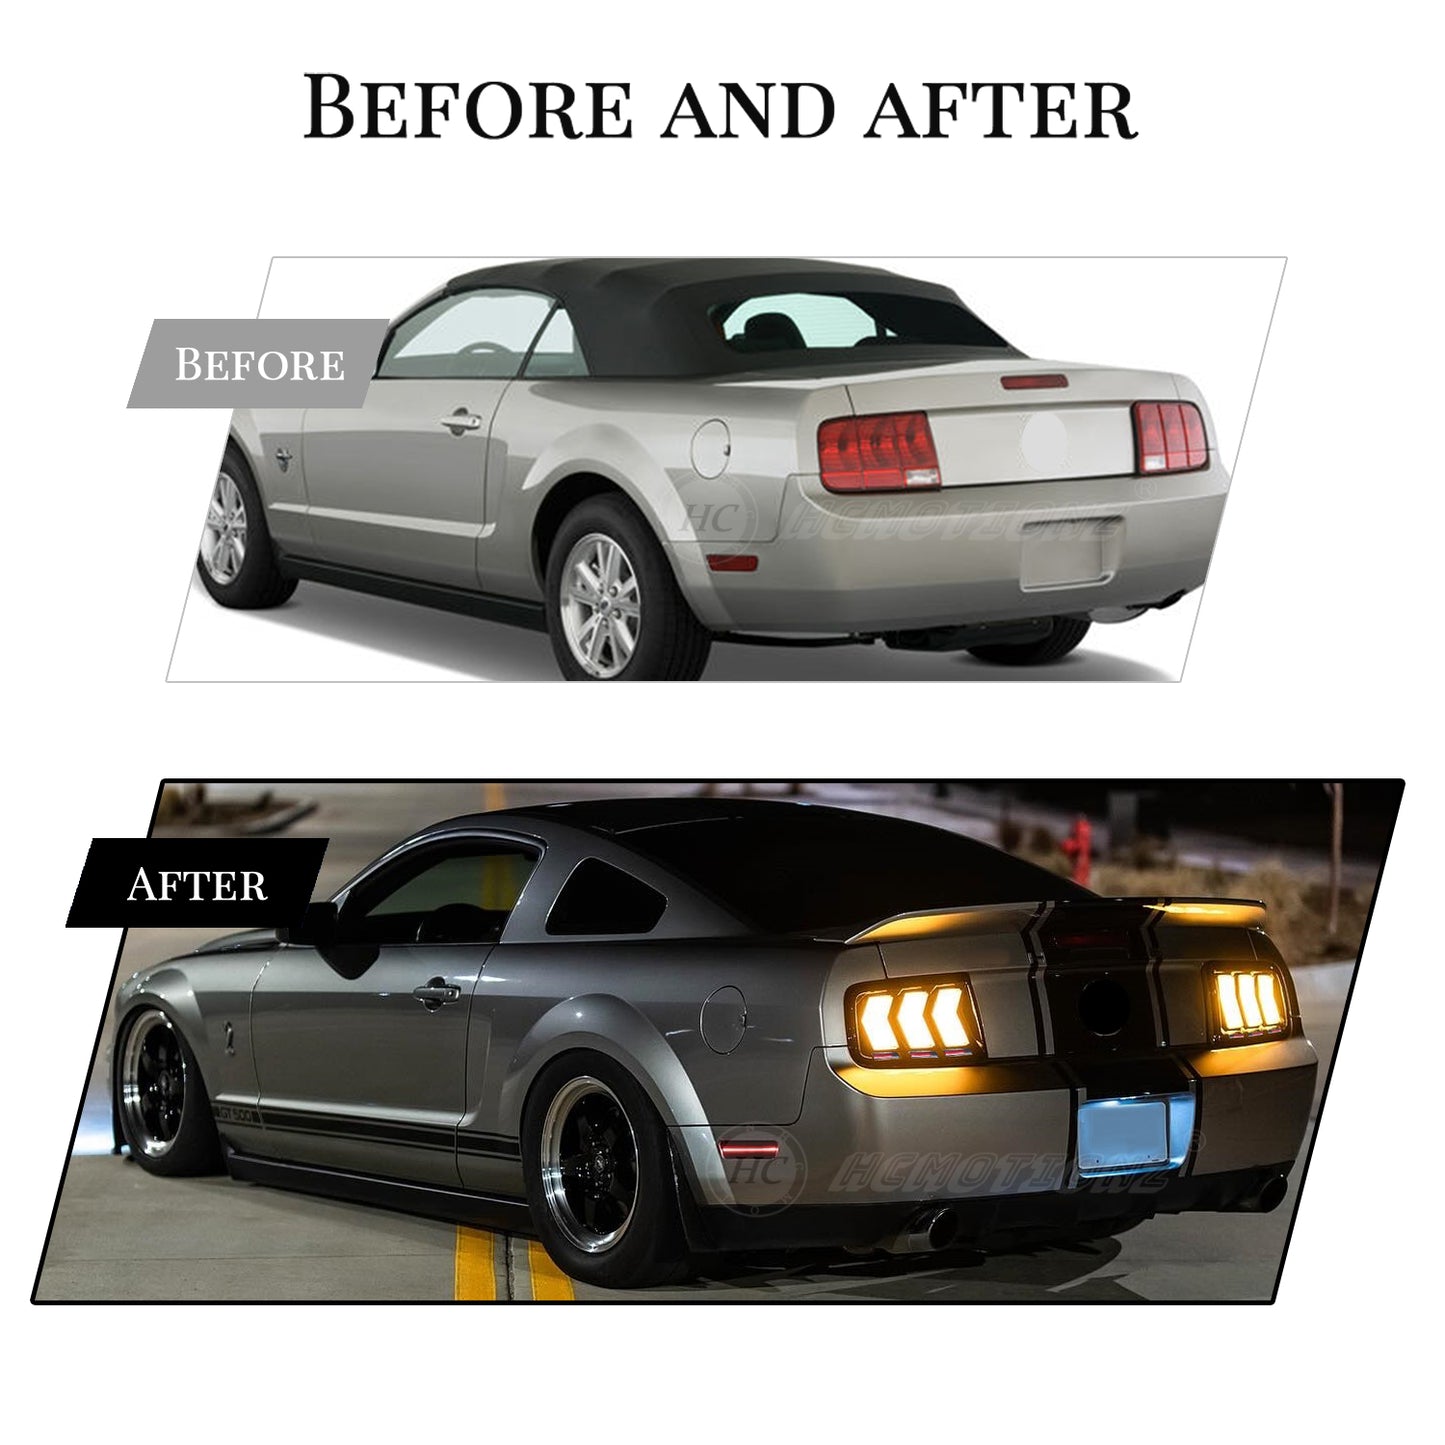 HCMOTIONZ LED RGB Tail lights For Ford Mustang 2005-2009 High Quality Start UP Animation